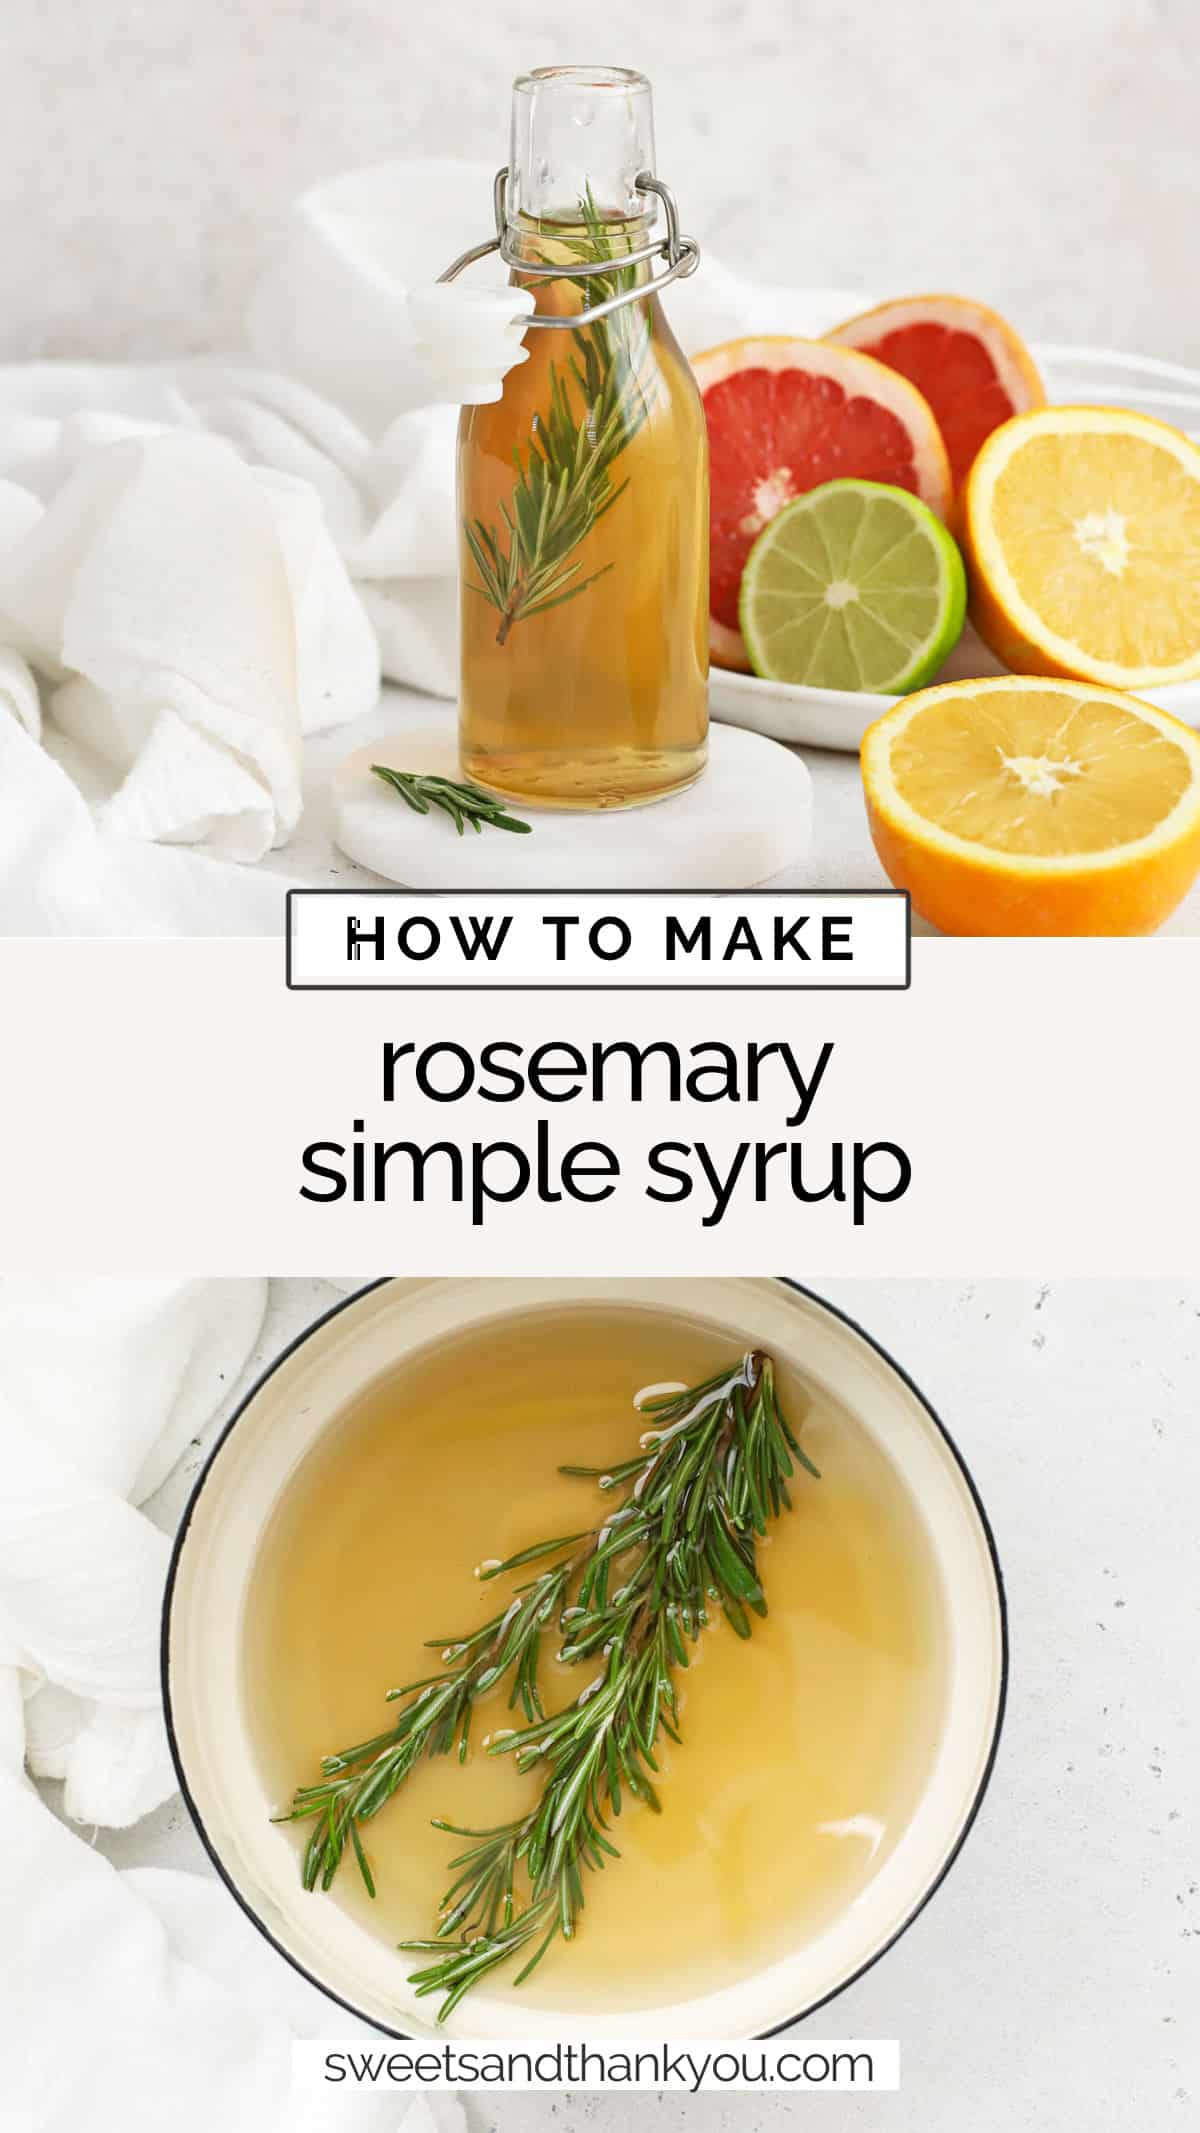 How To Make Rosemary Simple Syrup - This homemade rosemary syrup recipe adds gorgeous flavor to mocktails and cocktails of all kinds. (Don't miss all the yummy ways to use it!) // rosemary cocktail syrup recipe / rosemary mocktail syrup recipe / simple syrup recipes / rosemary infused simple syrup, infused simple syrup recipe / rosemary mocktails / rosemary cocktails / rosemary mocktail mixer / rosemary cocktail mixer 